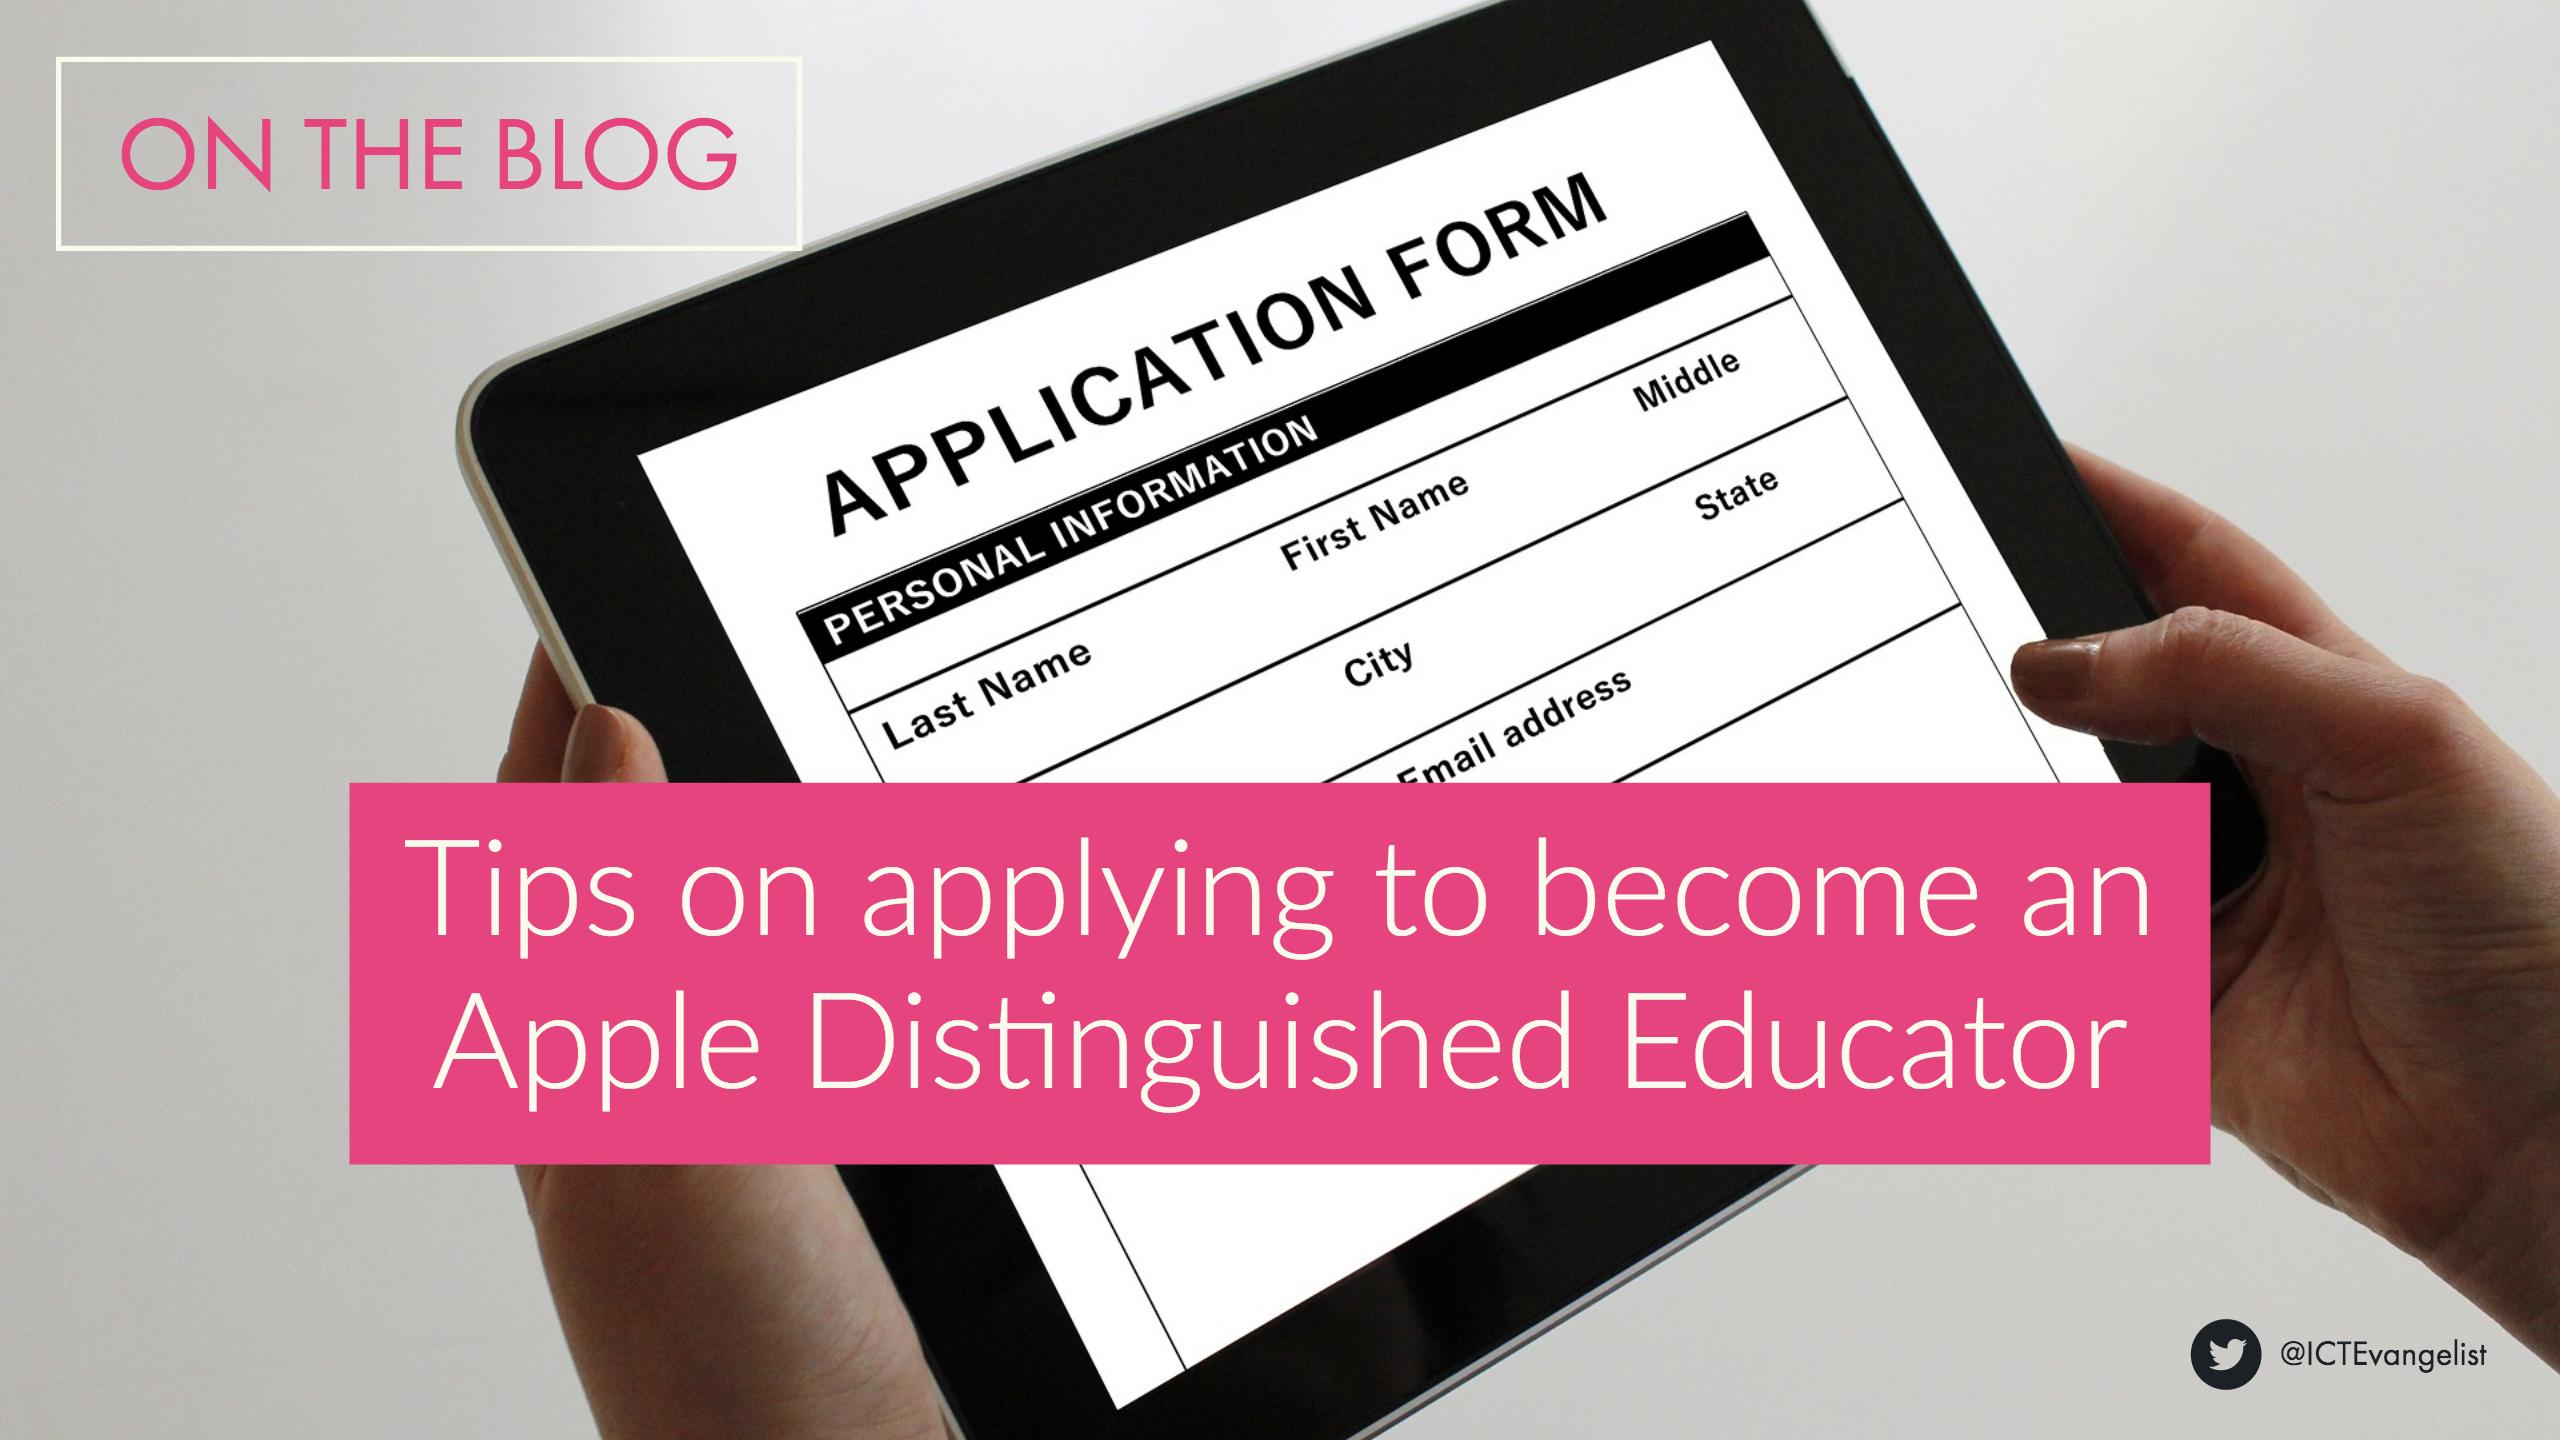 My tips on applying to an Apple Distinguished Educator